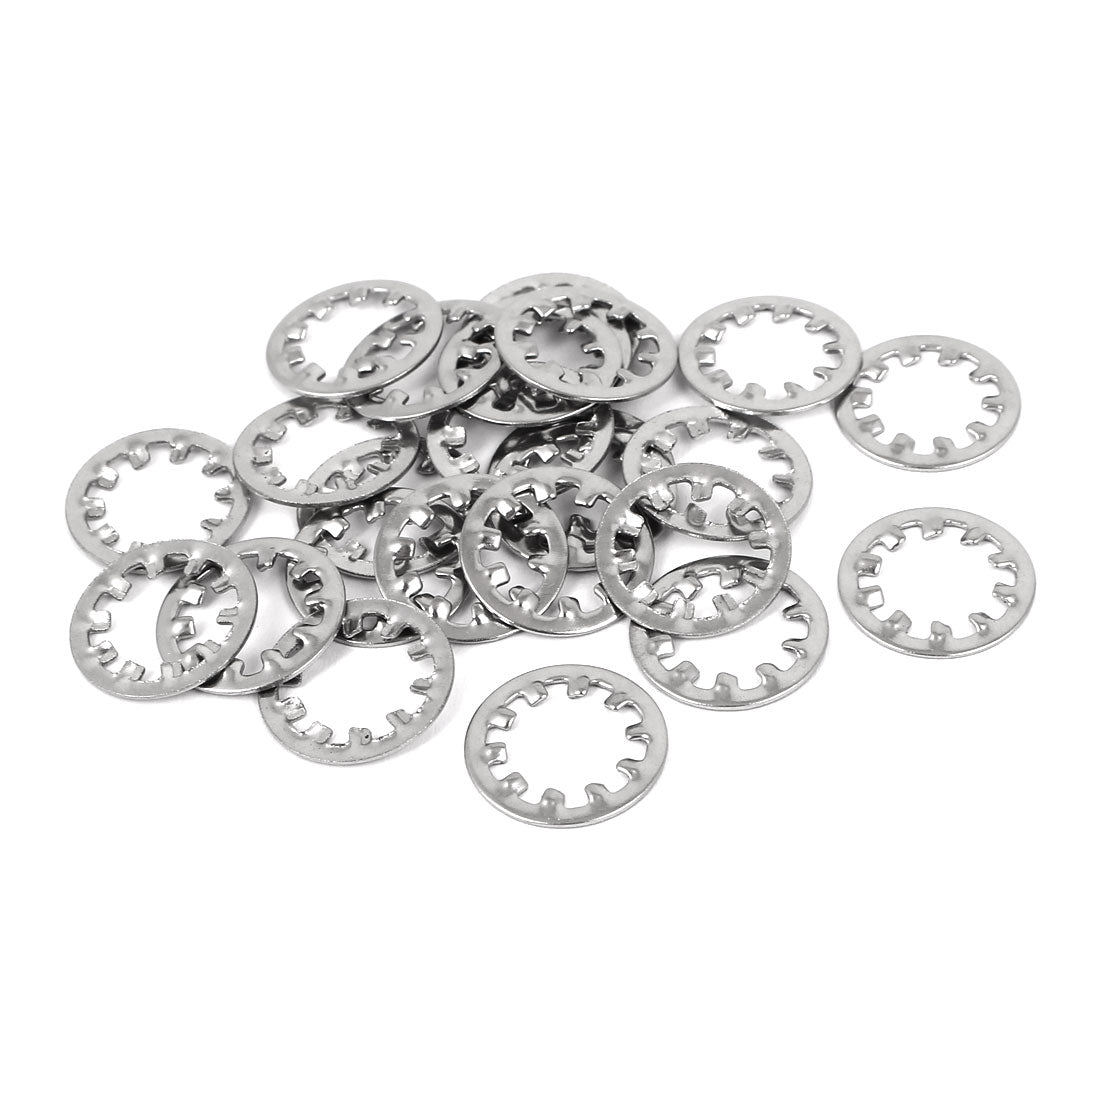 Uxcell Uxcell M10 304 Stainless Steel Internal Star Lock Washers 25 Pcs